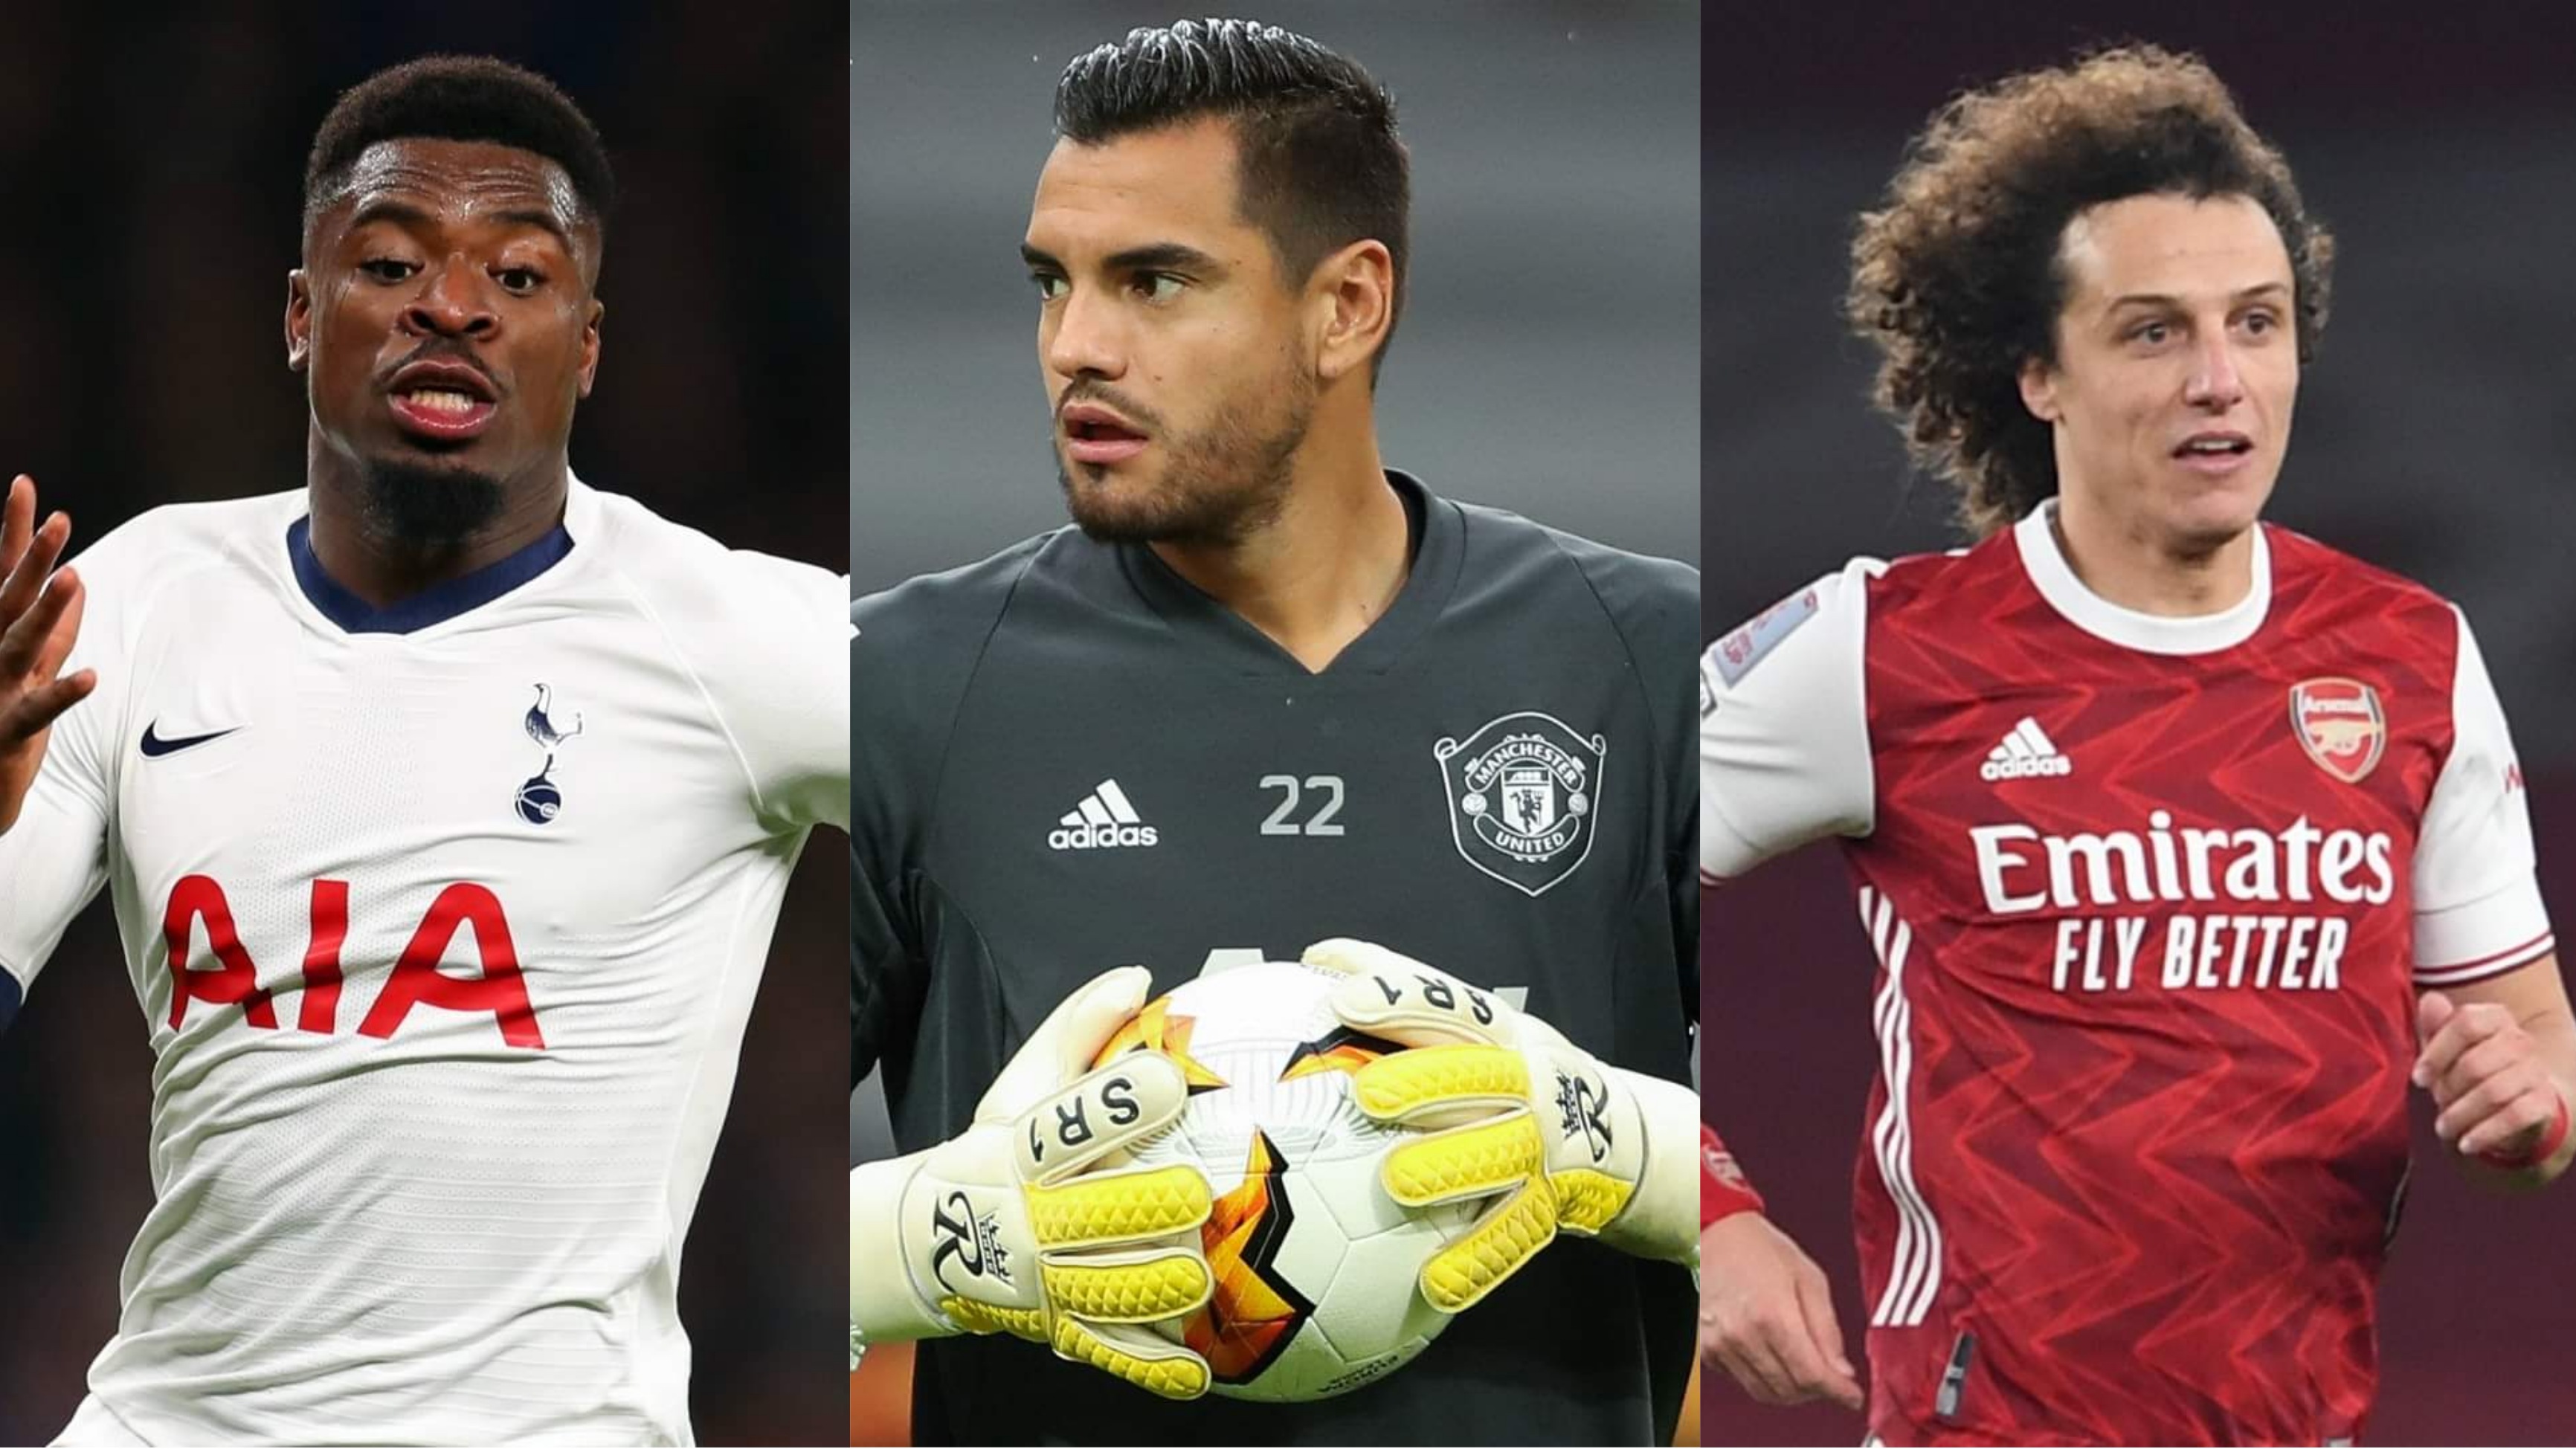 20 of the best free agents and the PL clubs theyd suit